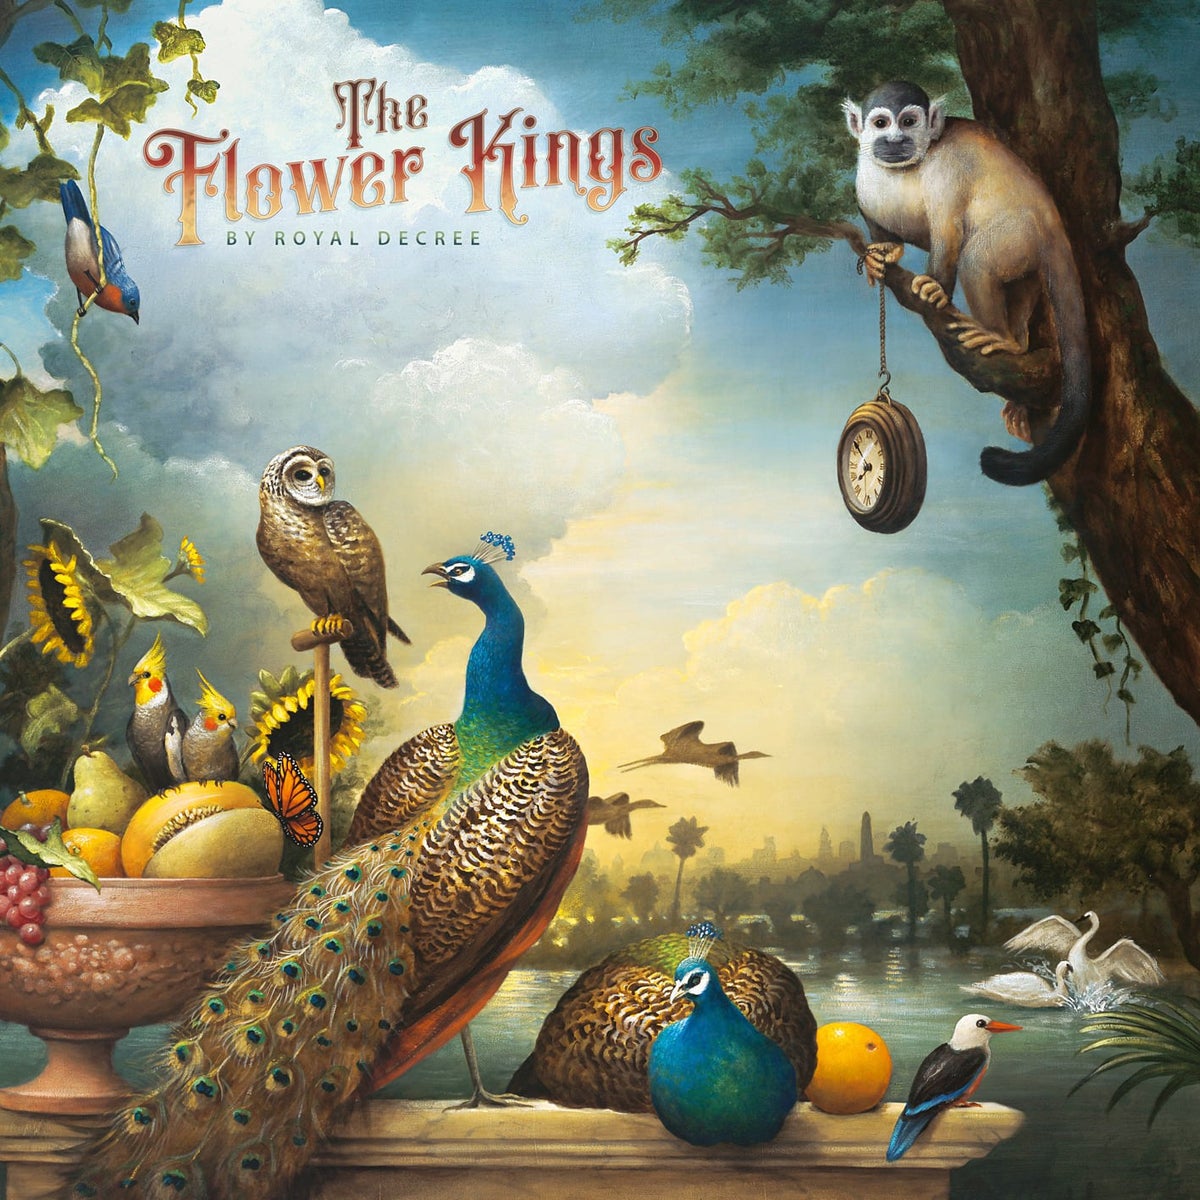 THE FLOWER KINGS – By Royal Decree